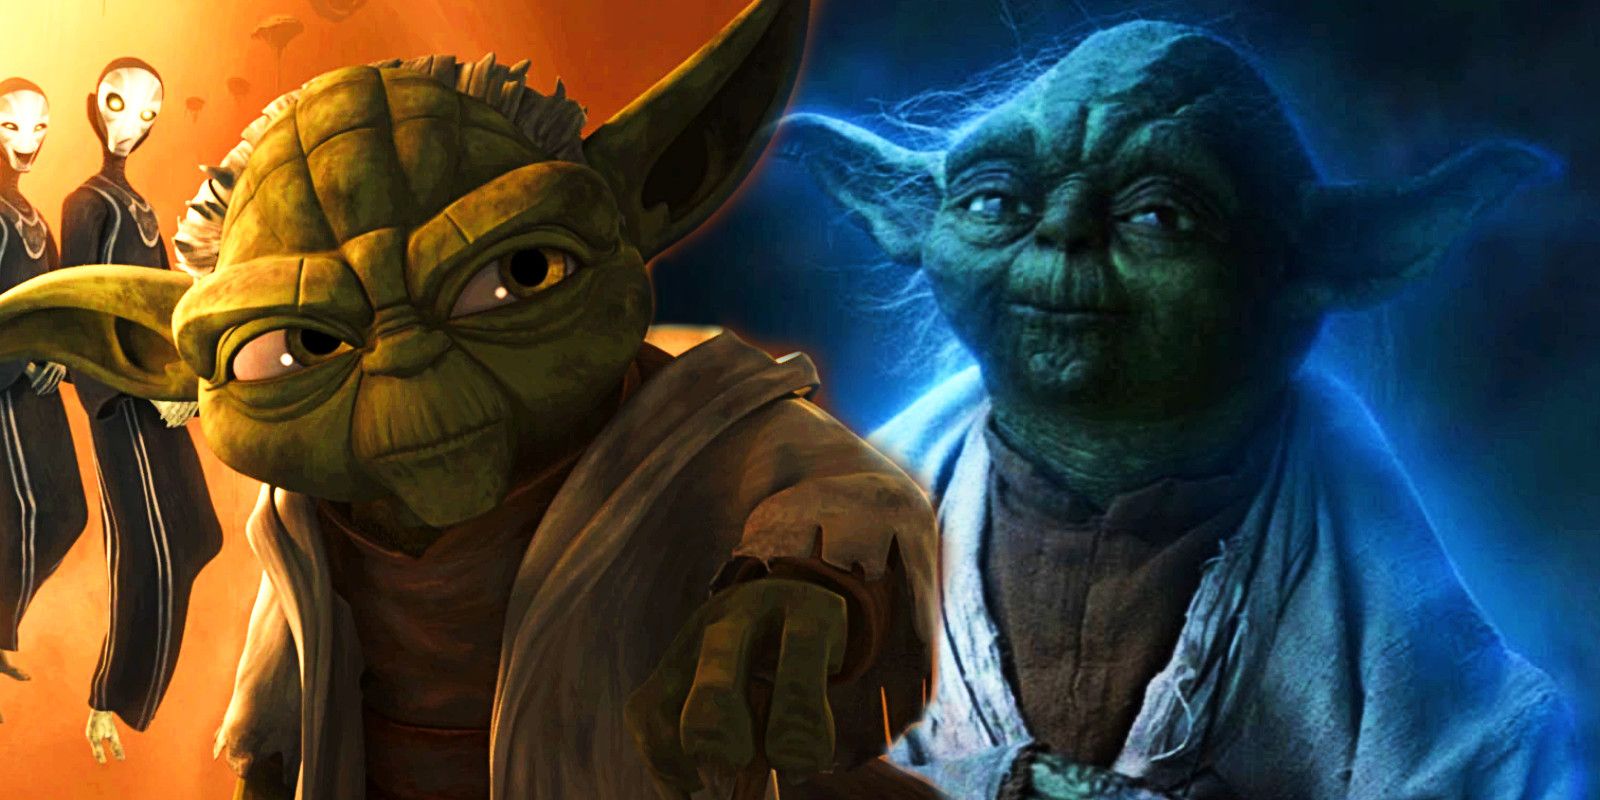 Yoda The Clone Wars and Yoda Force Ghost in The Last Jedi